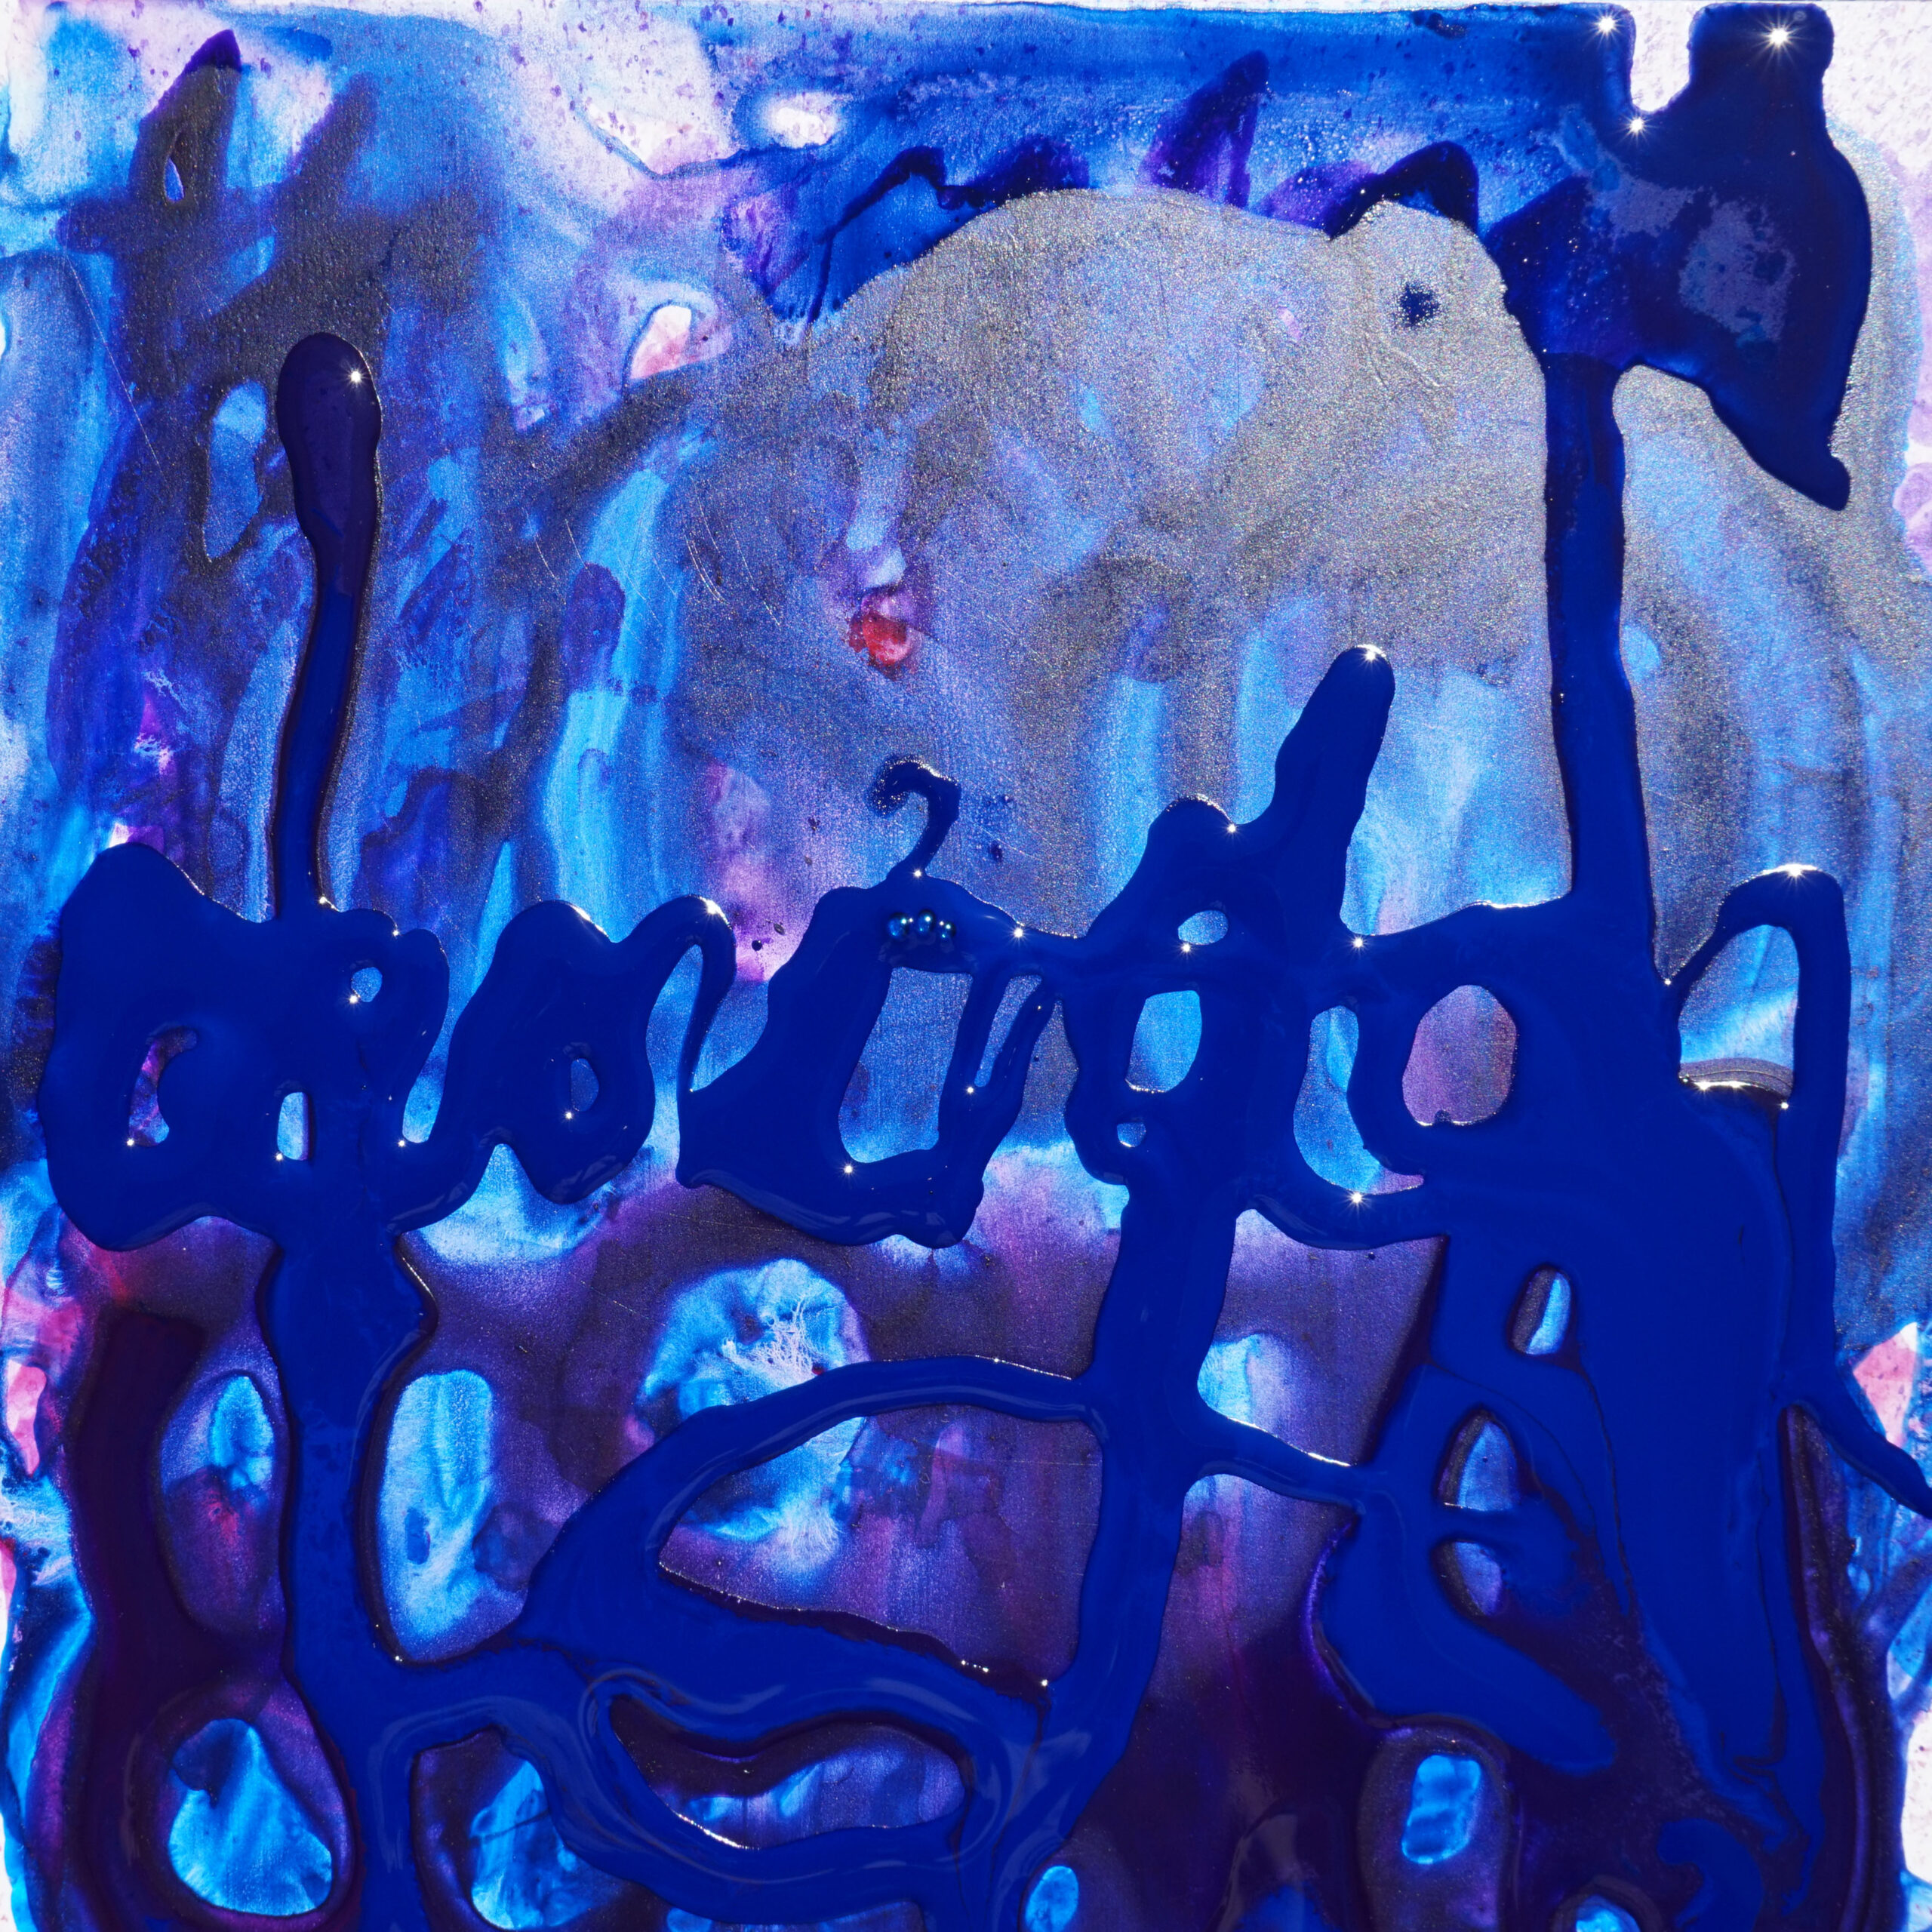 purple and blue layered, watery calligraphy drawn with acrylic paint and ink on gator board